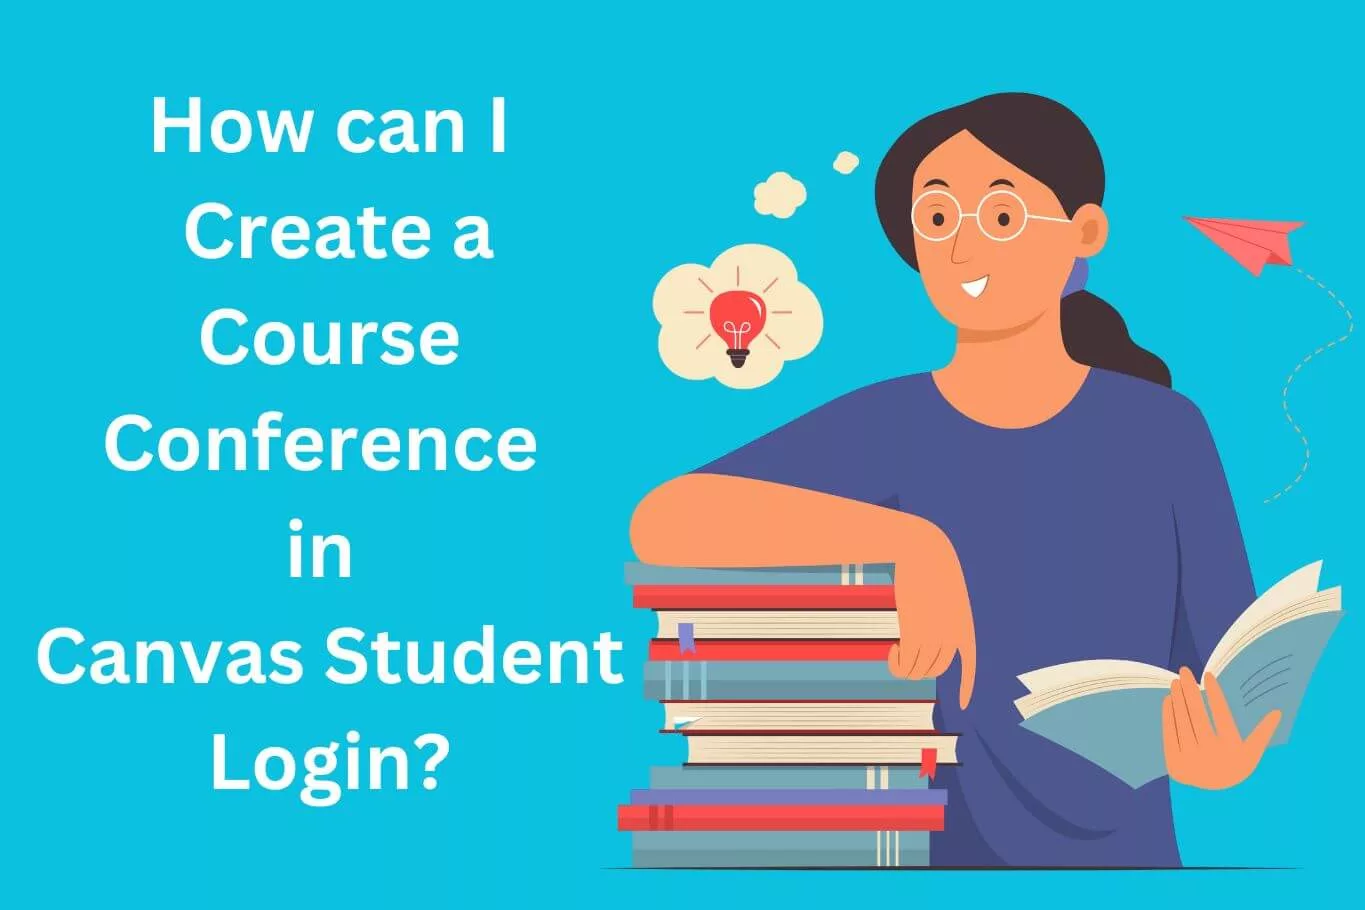 How can I Create a Course Conference in Canvas Student Login?